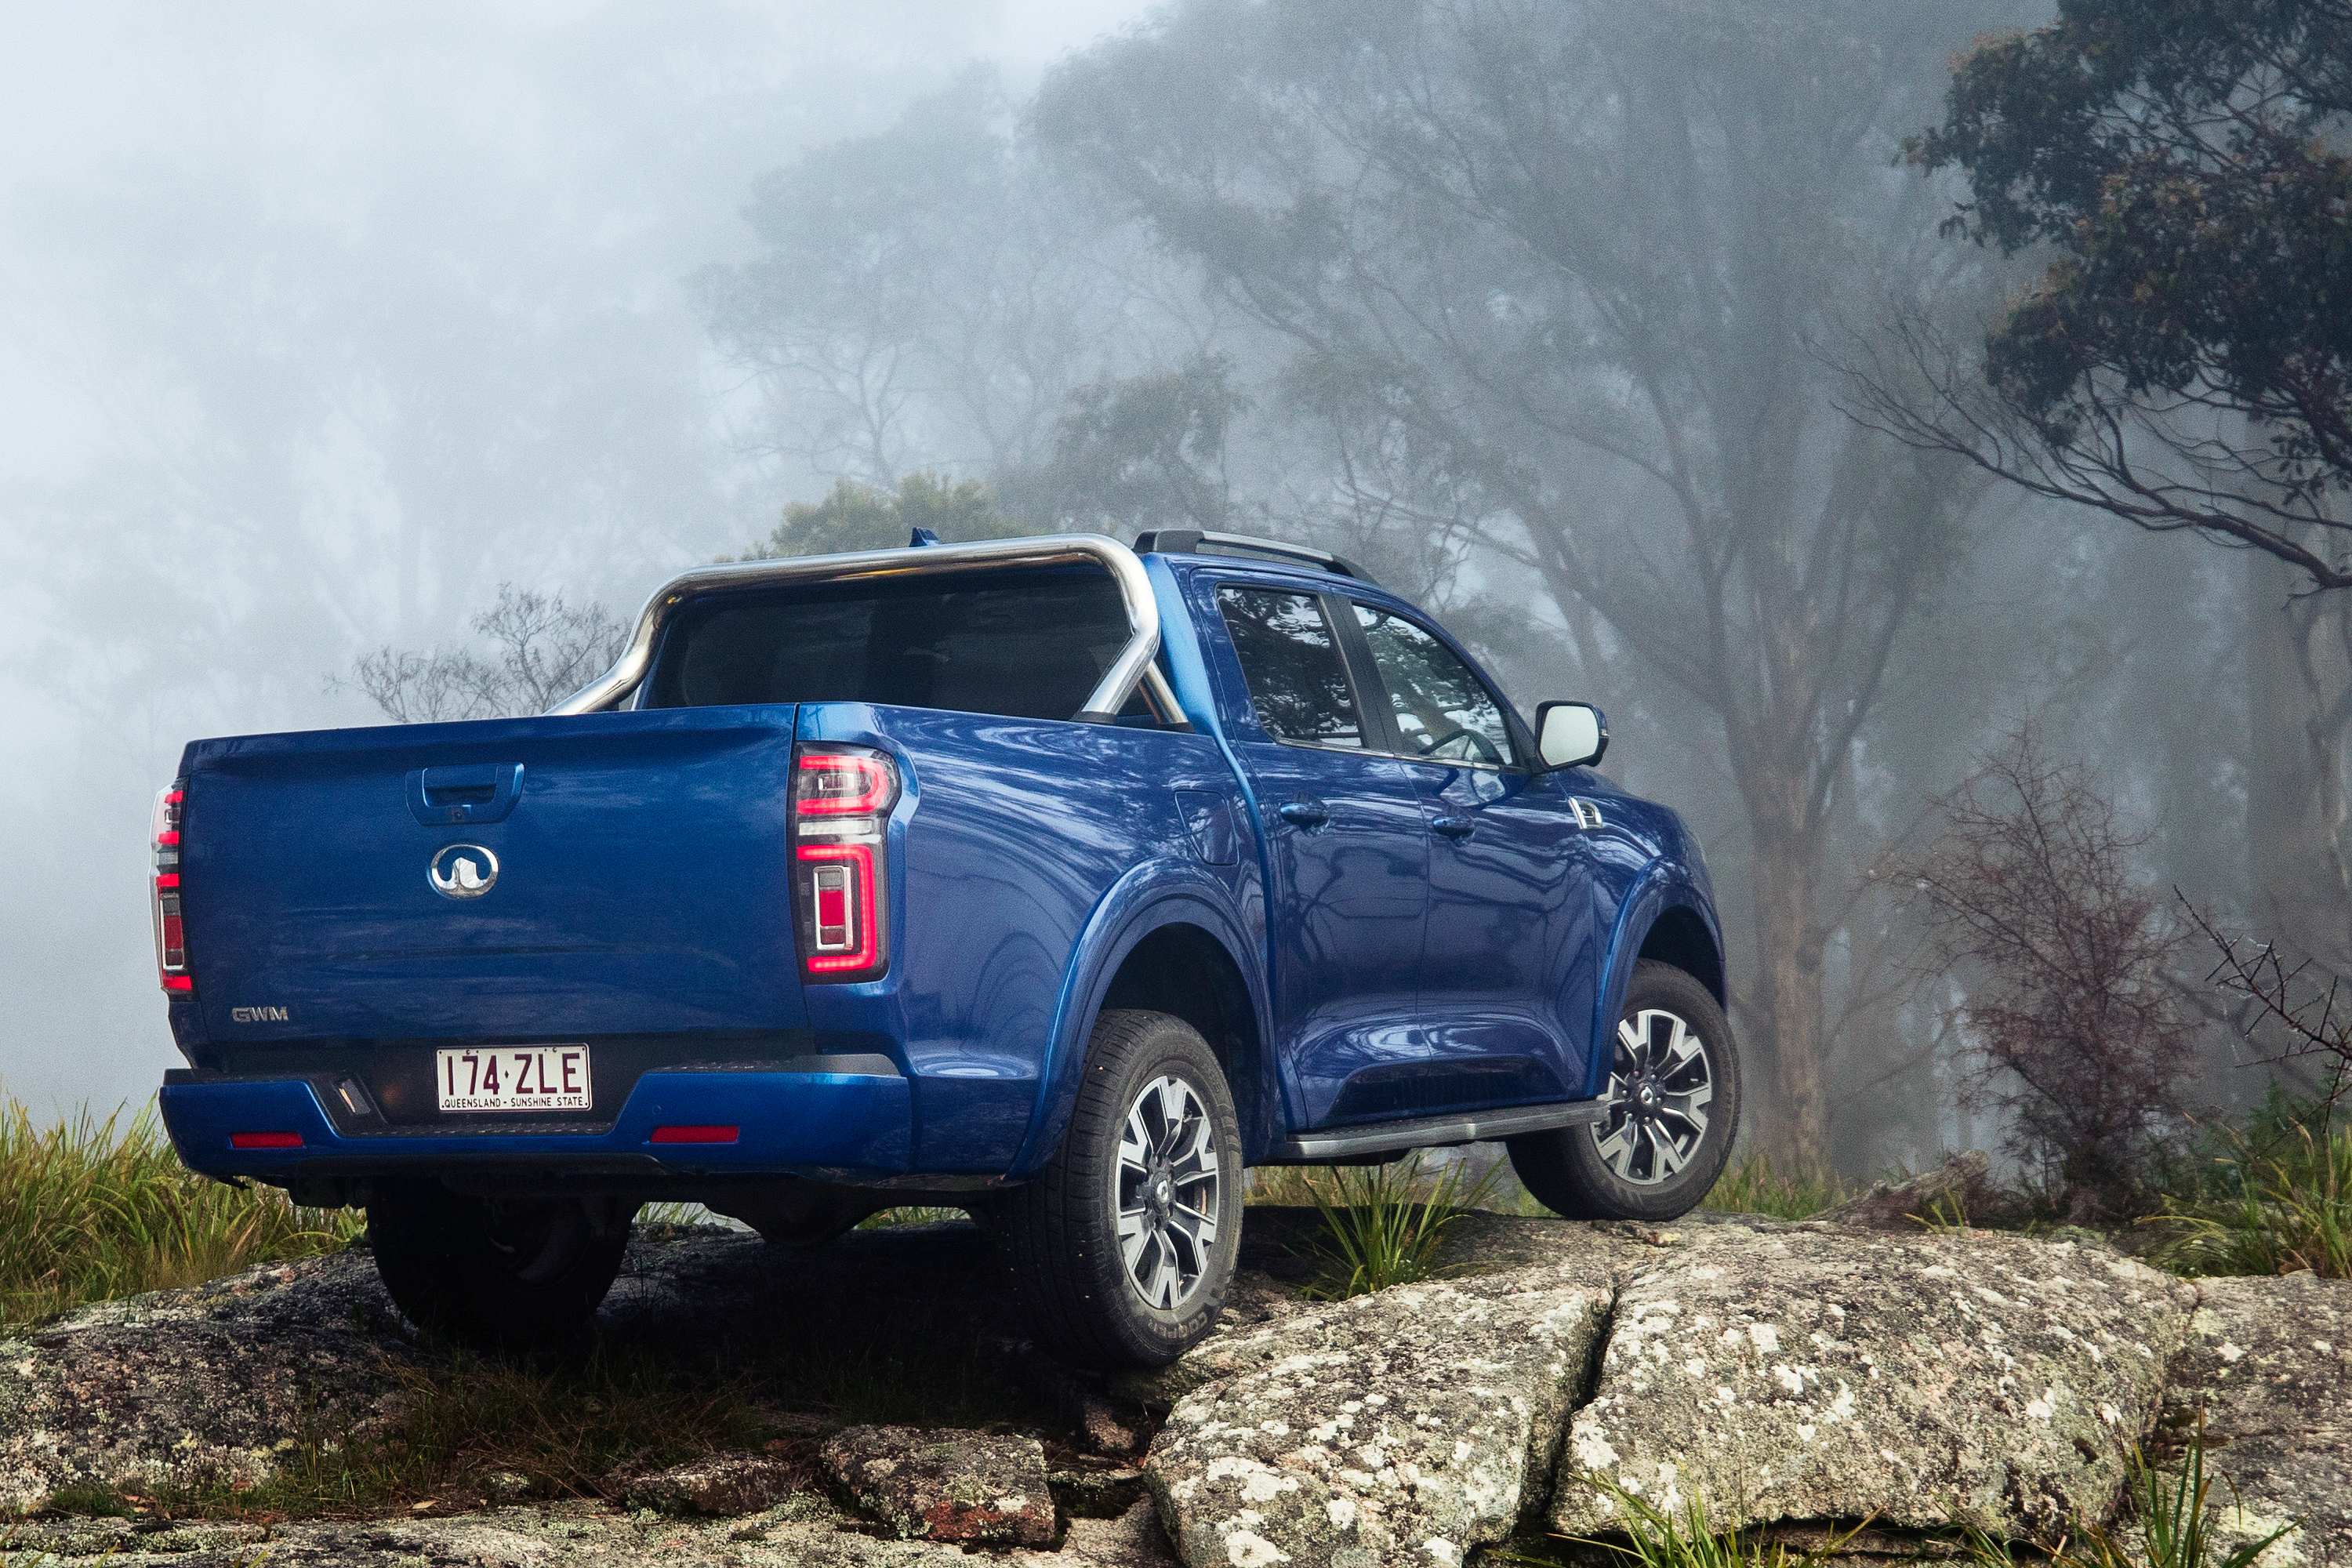 GWM Ute, newly designed and engineered from the ground-up.